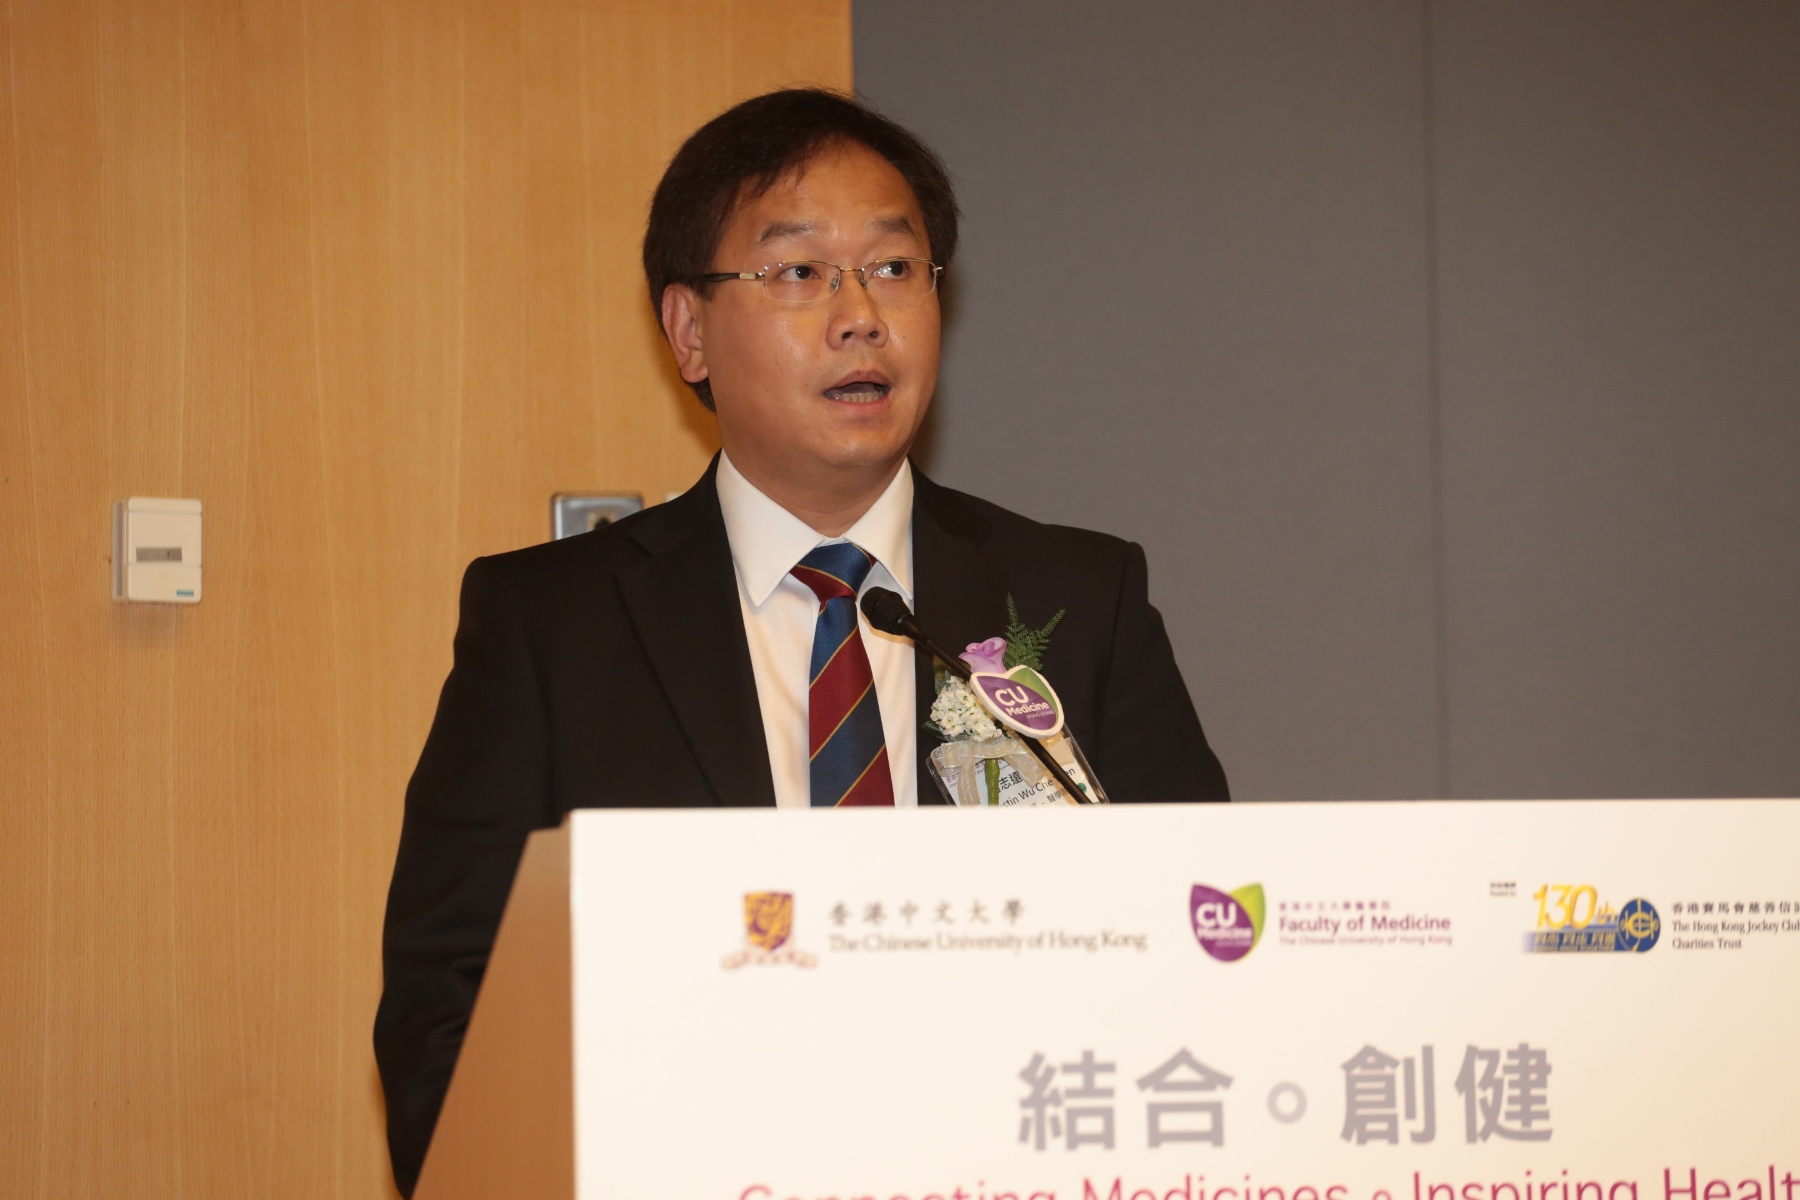 Prof Justin CY Wu, Director of the Hong Kong Institute of Integrative Medicine